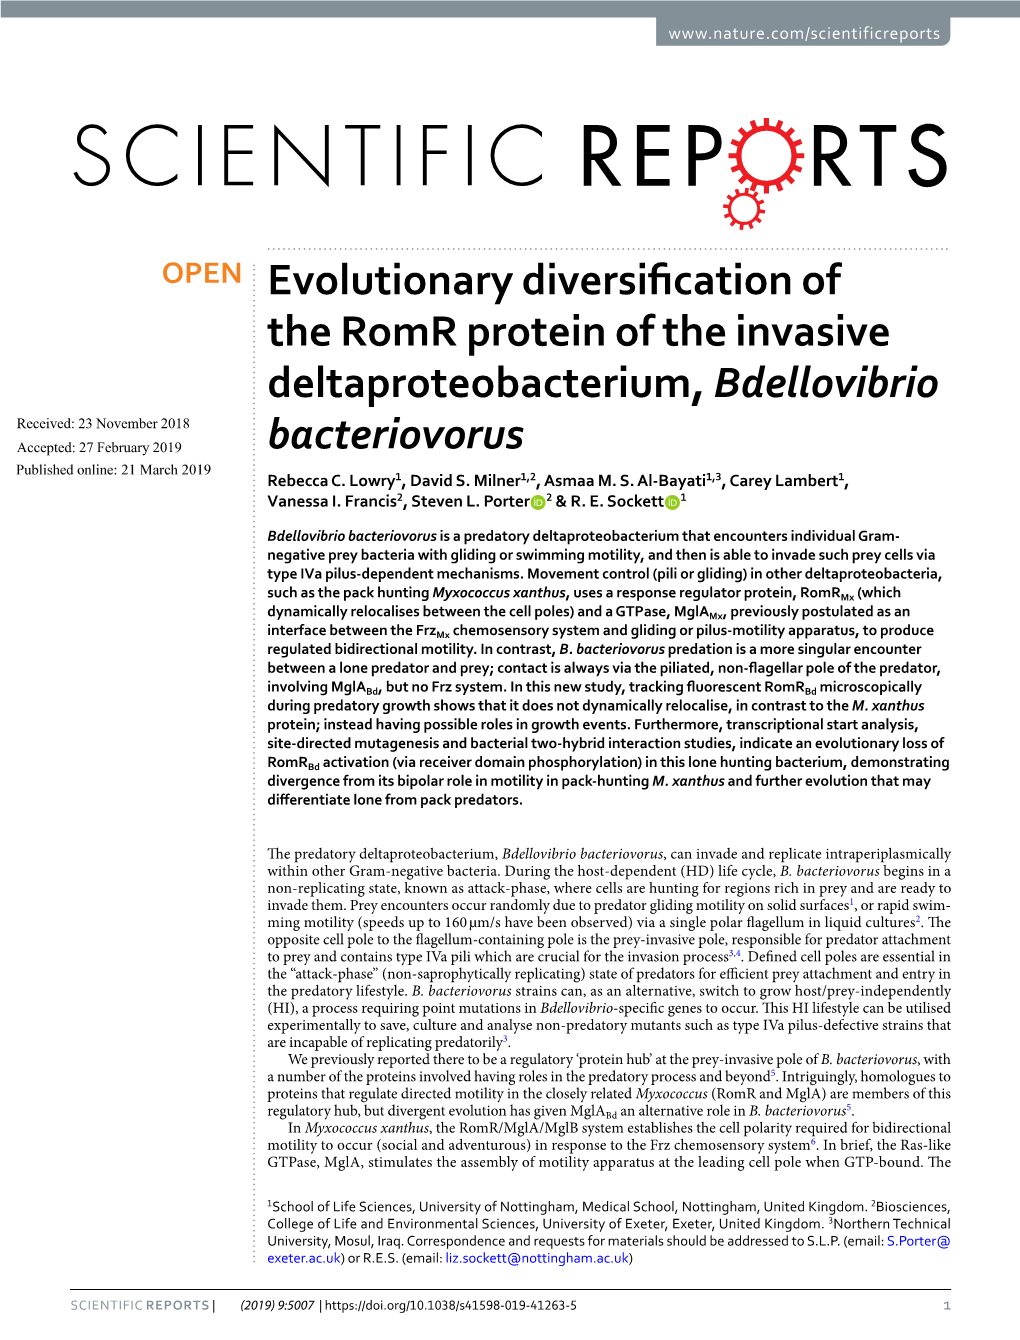 Evolutionary Diversification of the Romr Protein of the Invasive